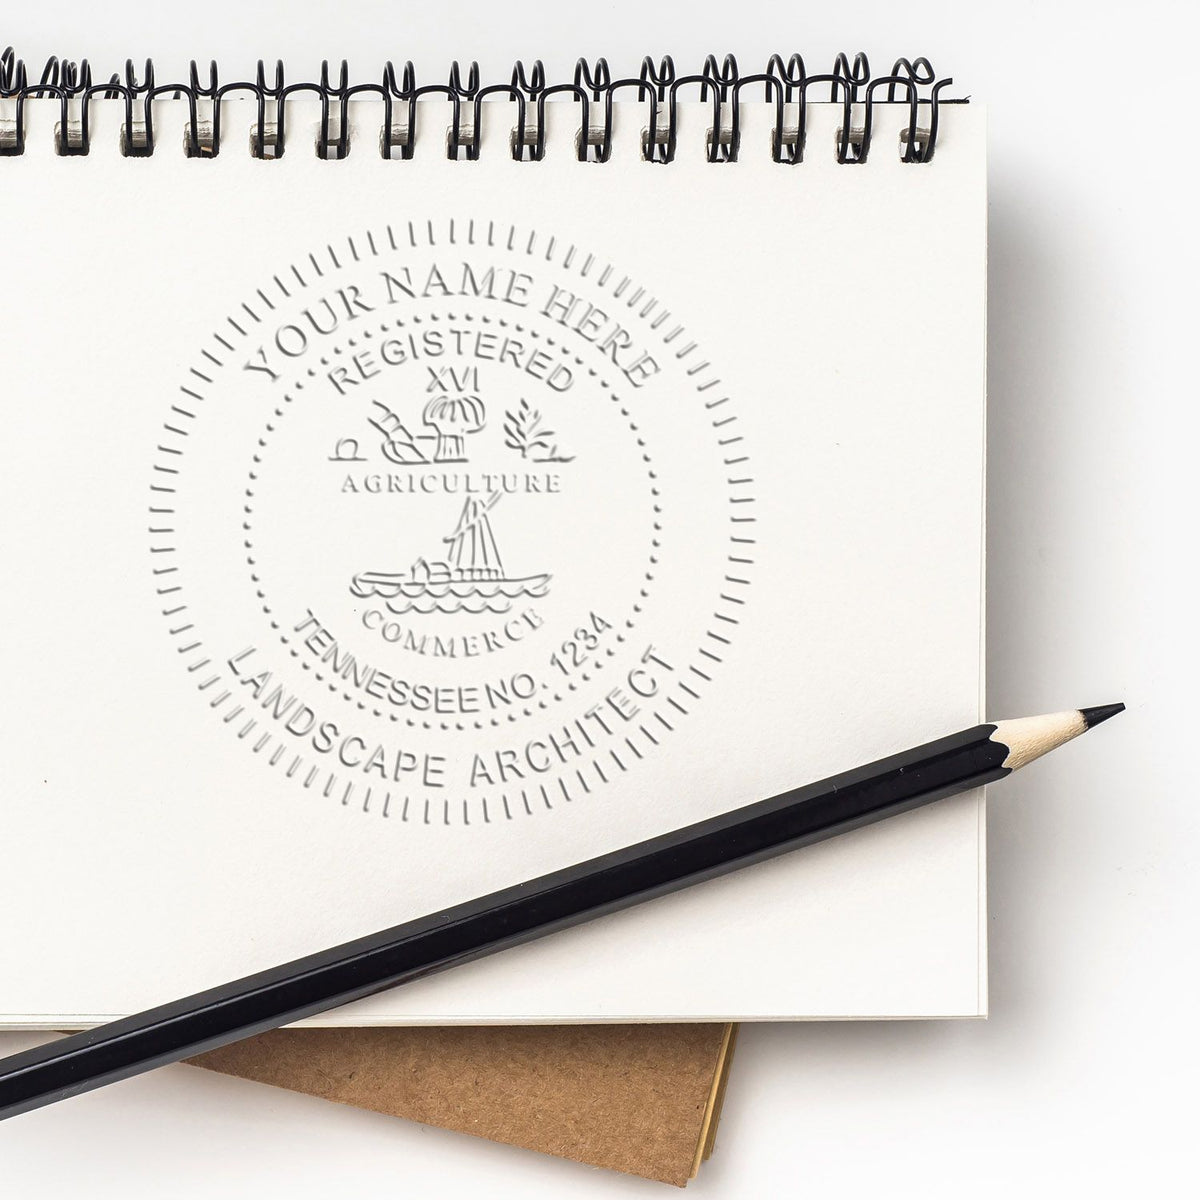 Another Example of a stamped impression of the Hybrid Tennessee Landscape Architect Seal on a office form